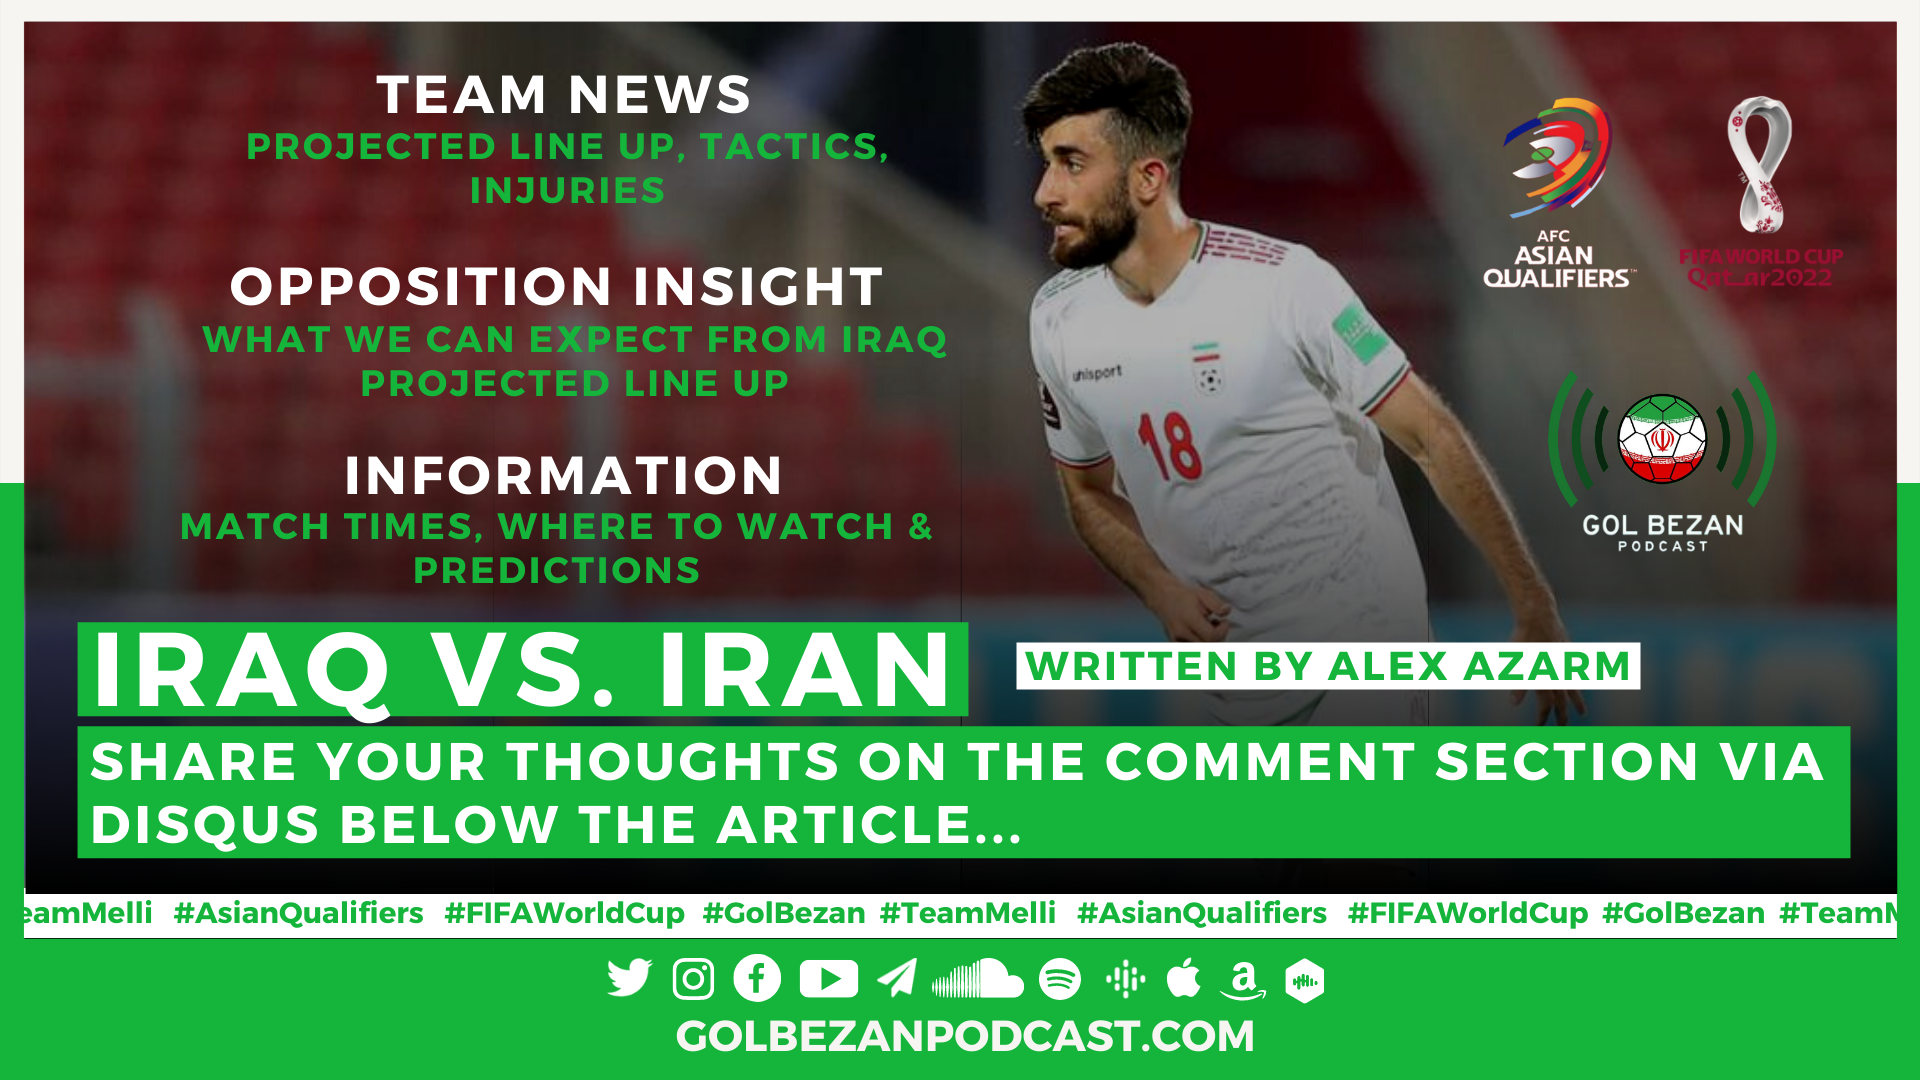 PREVIEW: Iran vs. Iraq | 2022 World Cup Qualifiers - Team News, Opposition Insight, Predictions and More